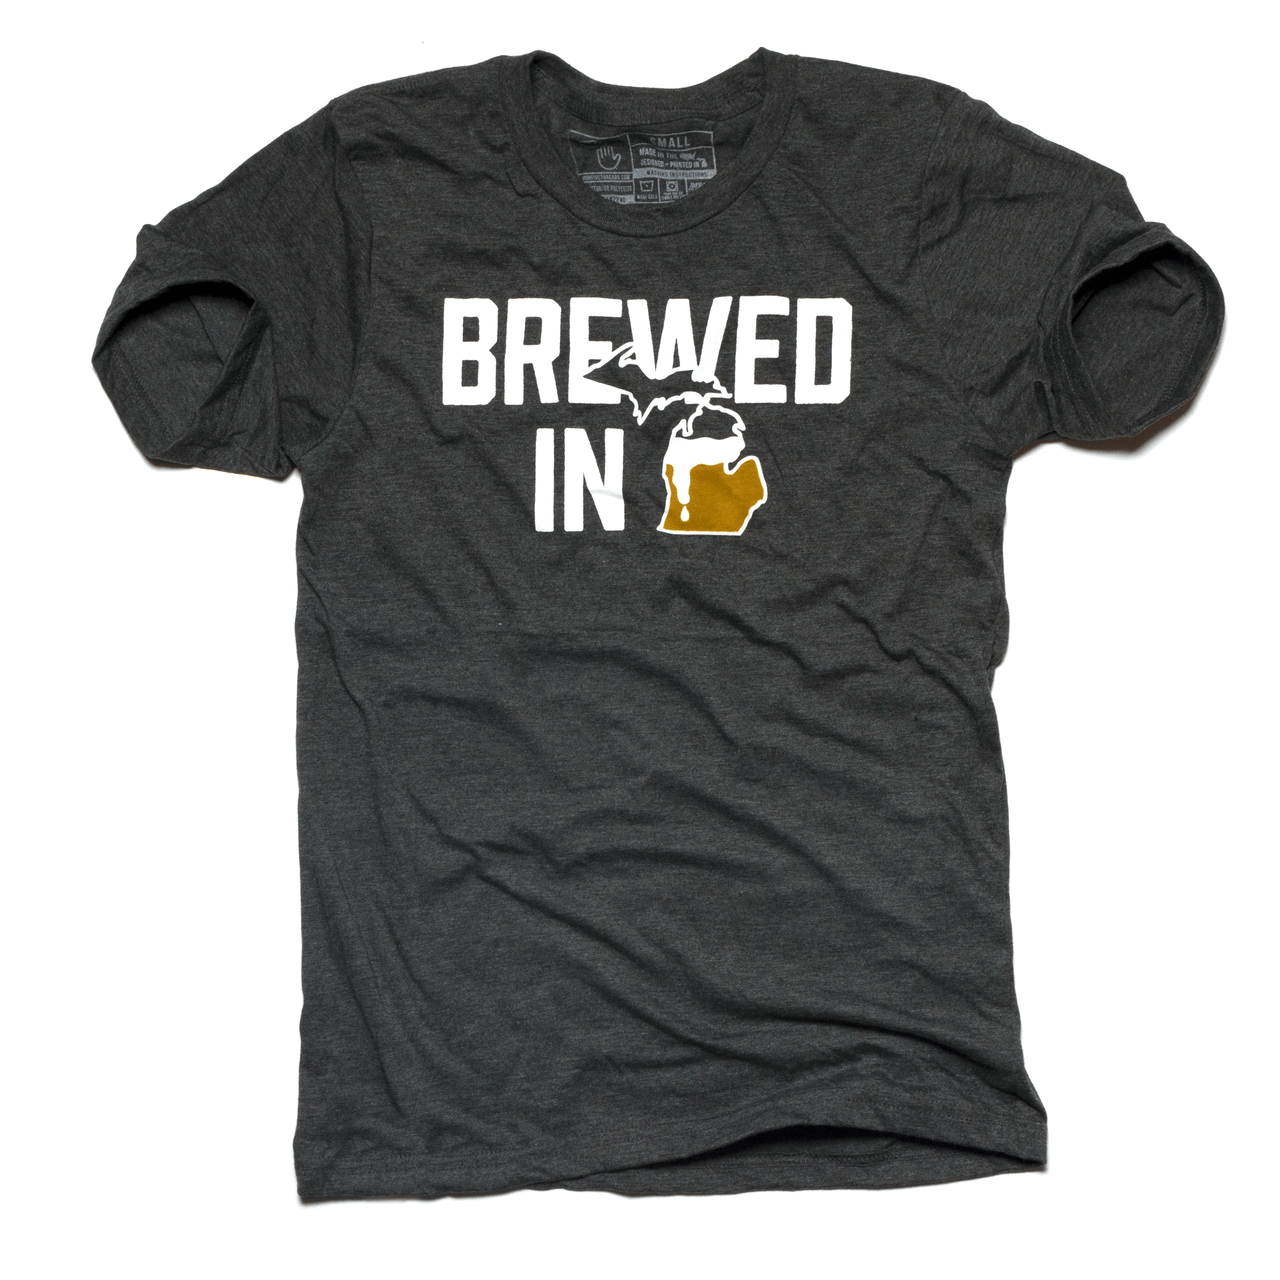 Brewed in Michigan (Charcoal)